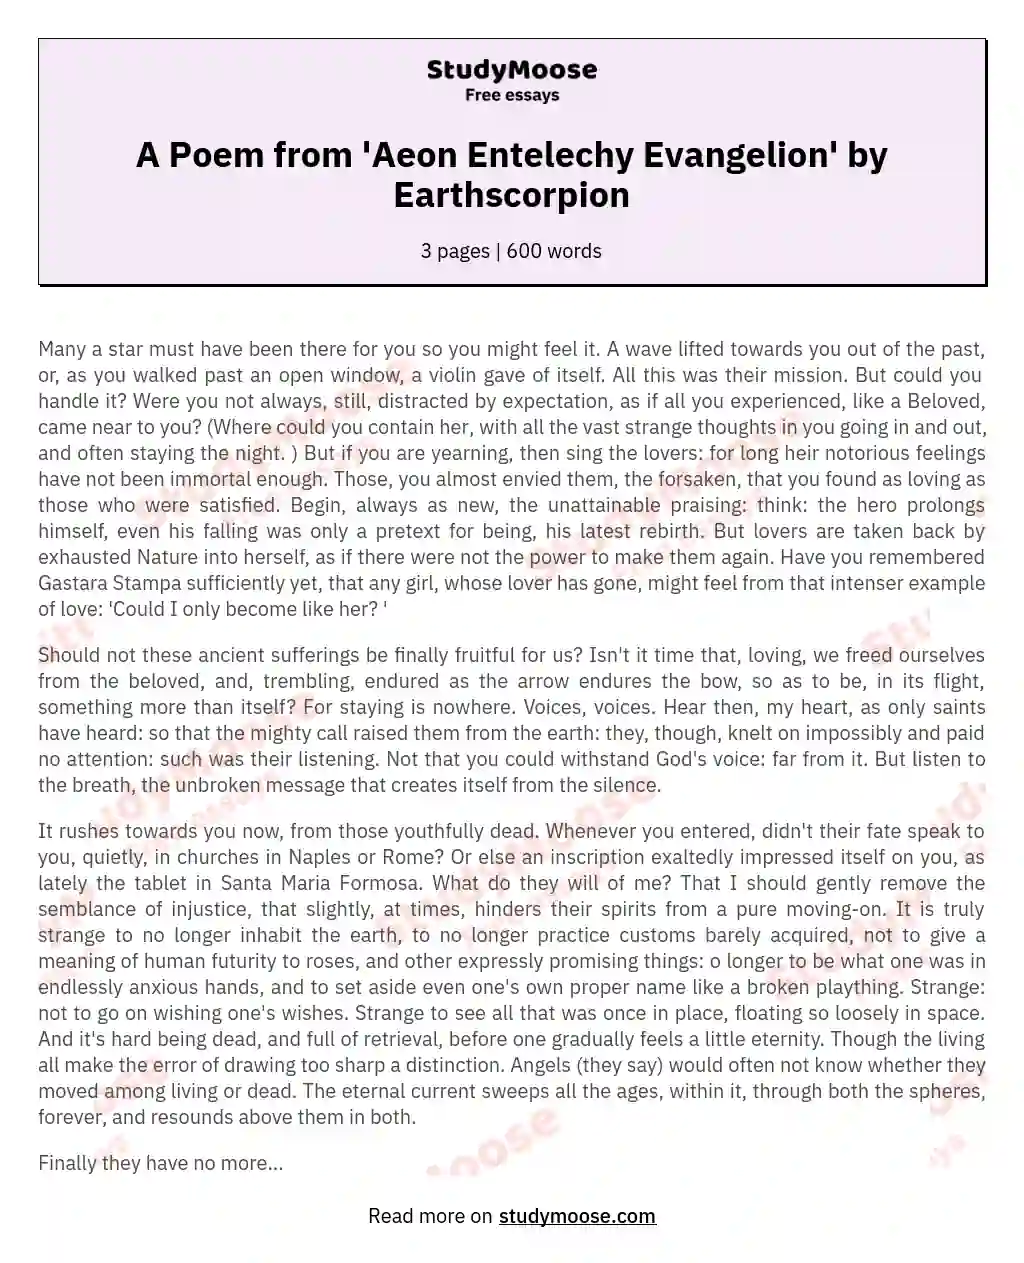 A Poem from 'Aeon Entelechy Evangelion' by Earthscorpion essay